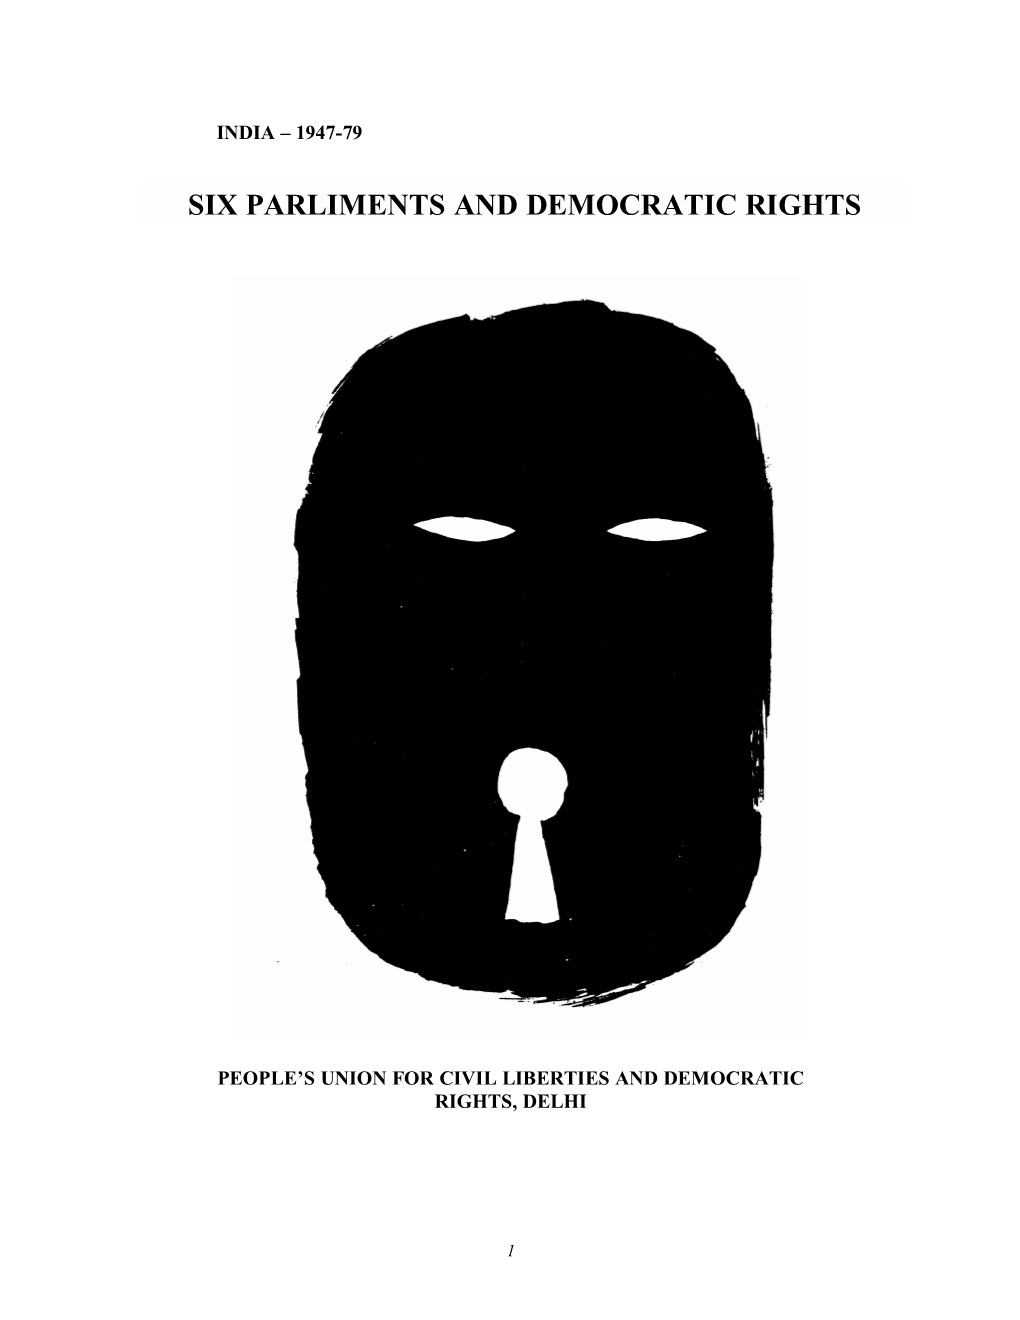 Six Parliments and Democratic Rights